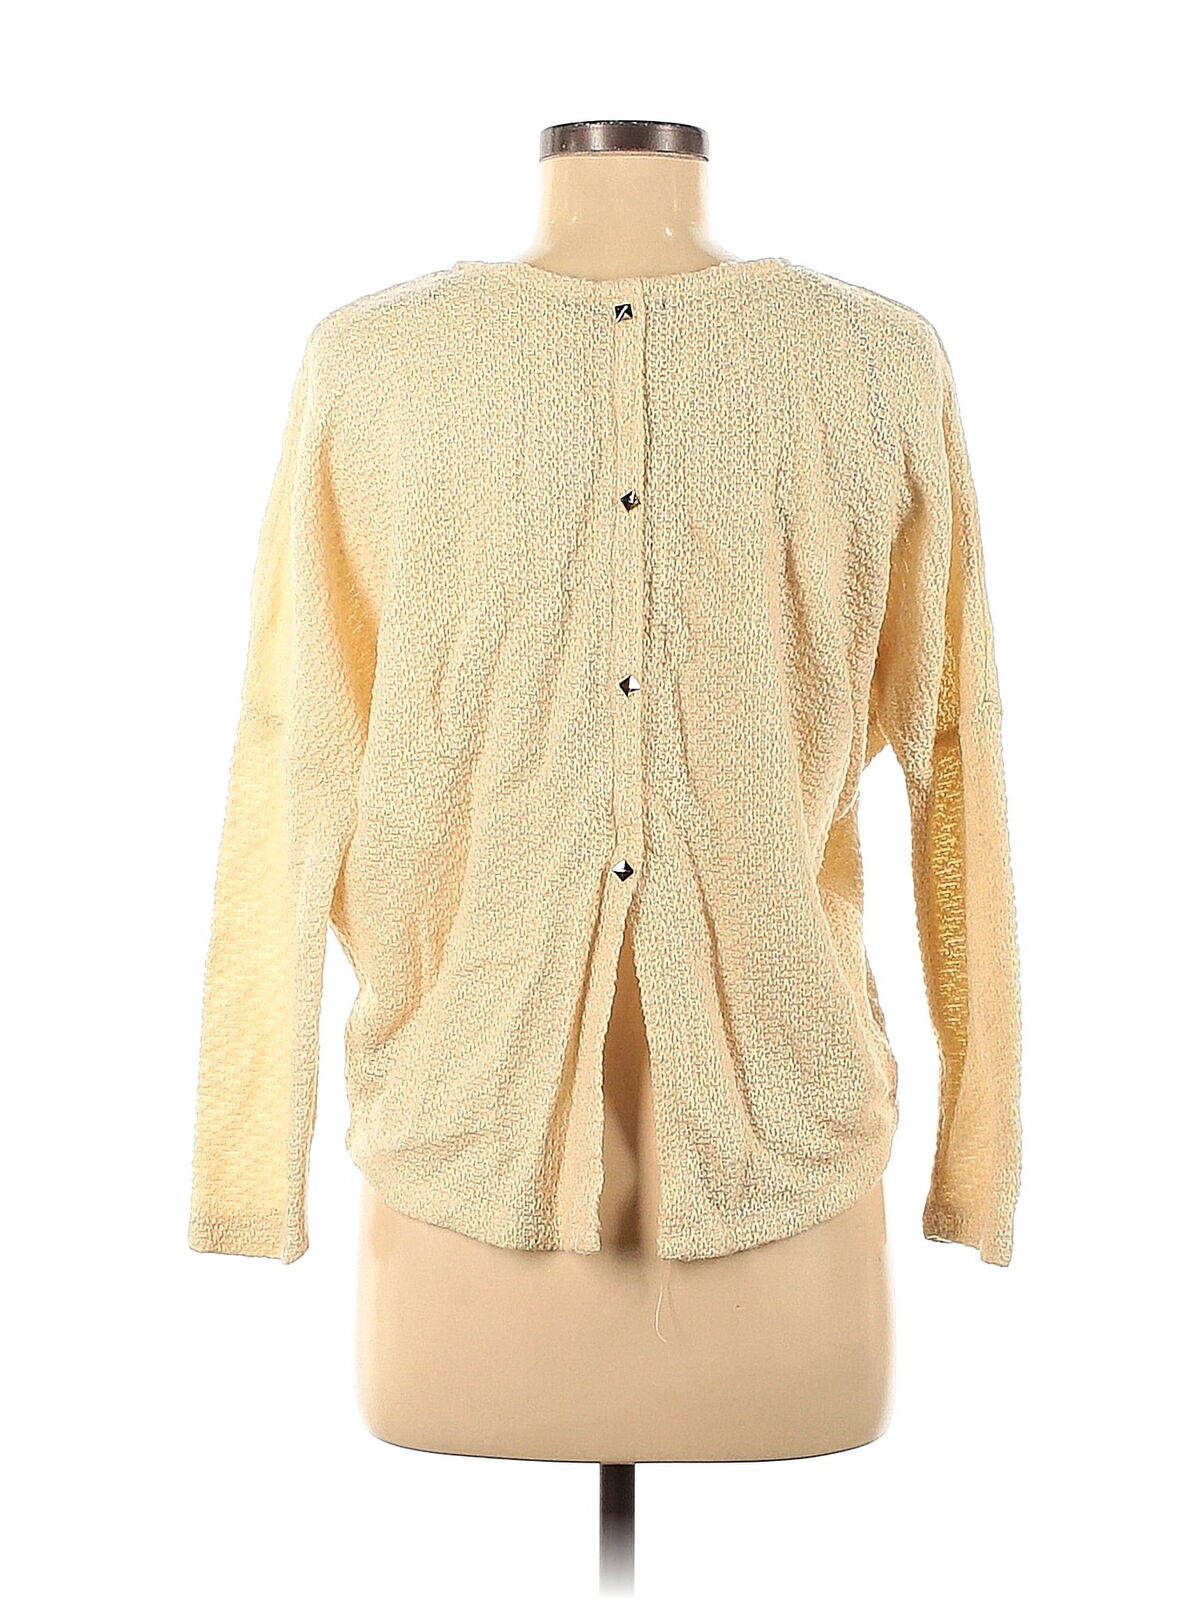 Forever 21 Women Ivory Pullover Sweater M - image 2